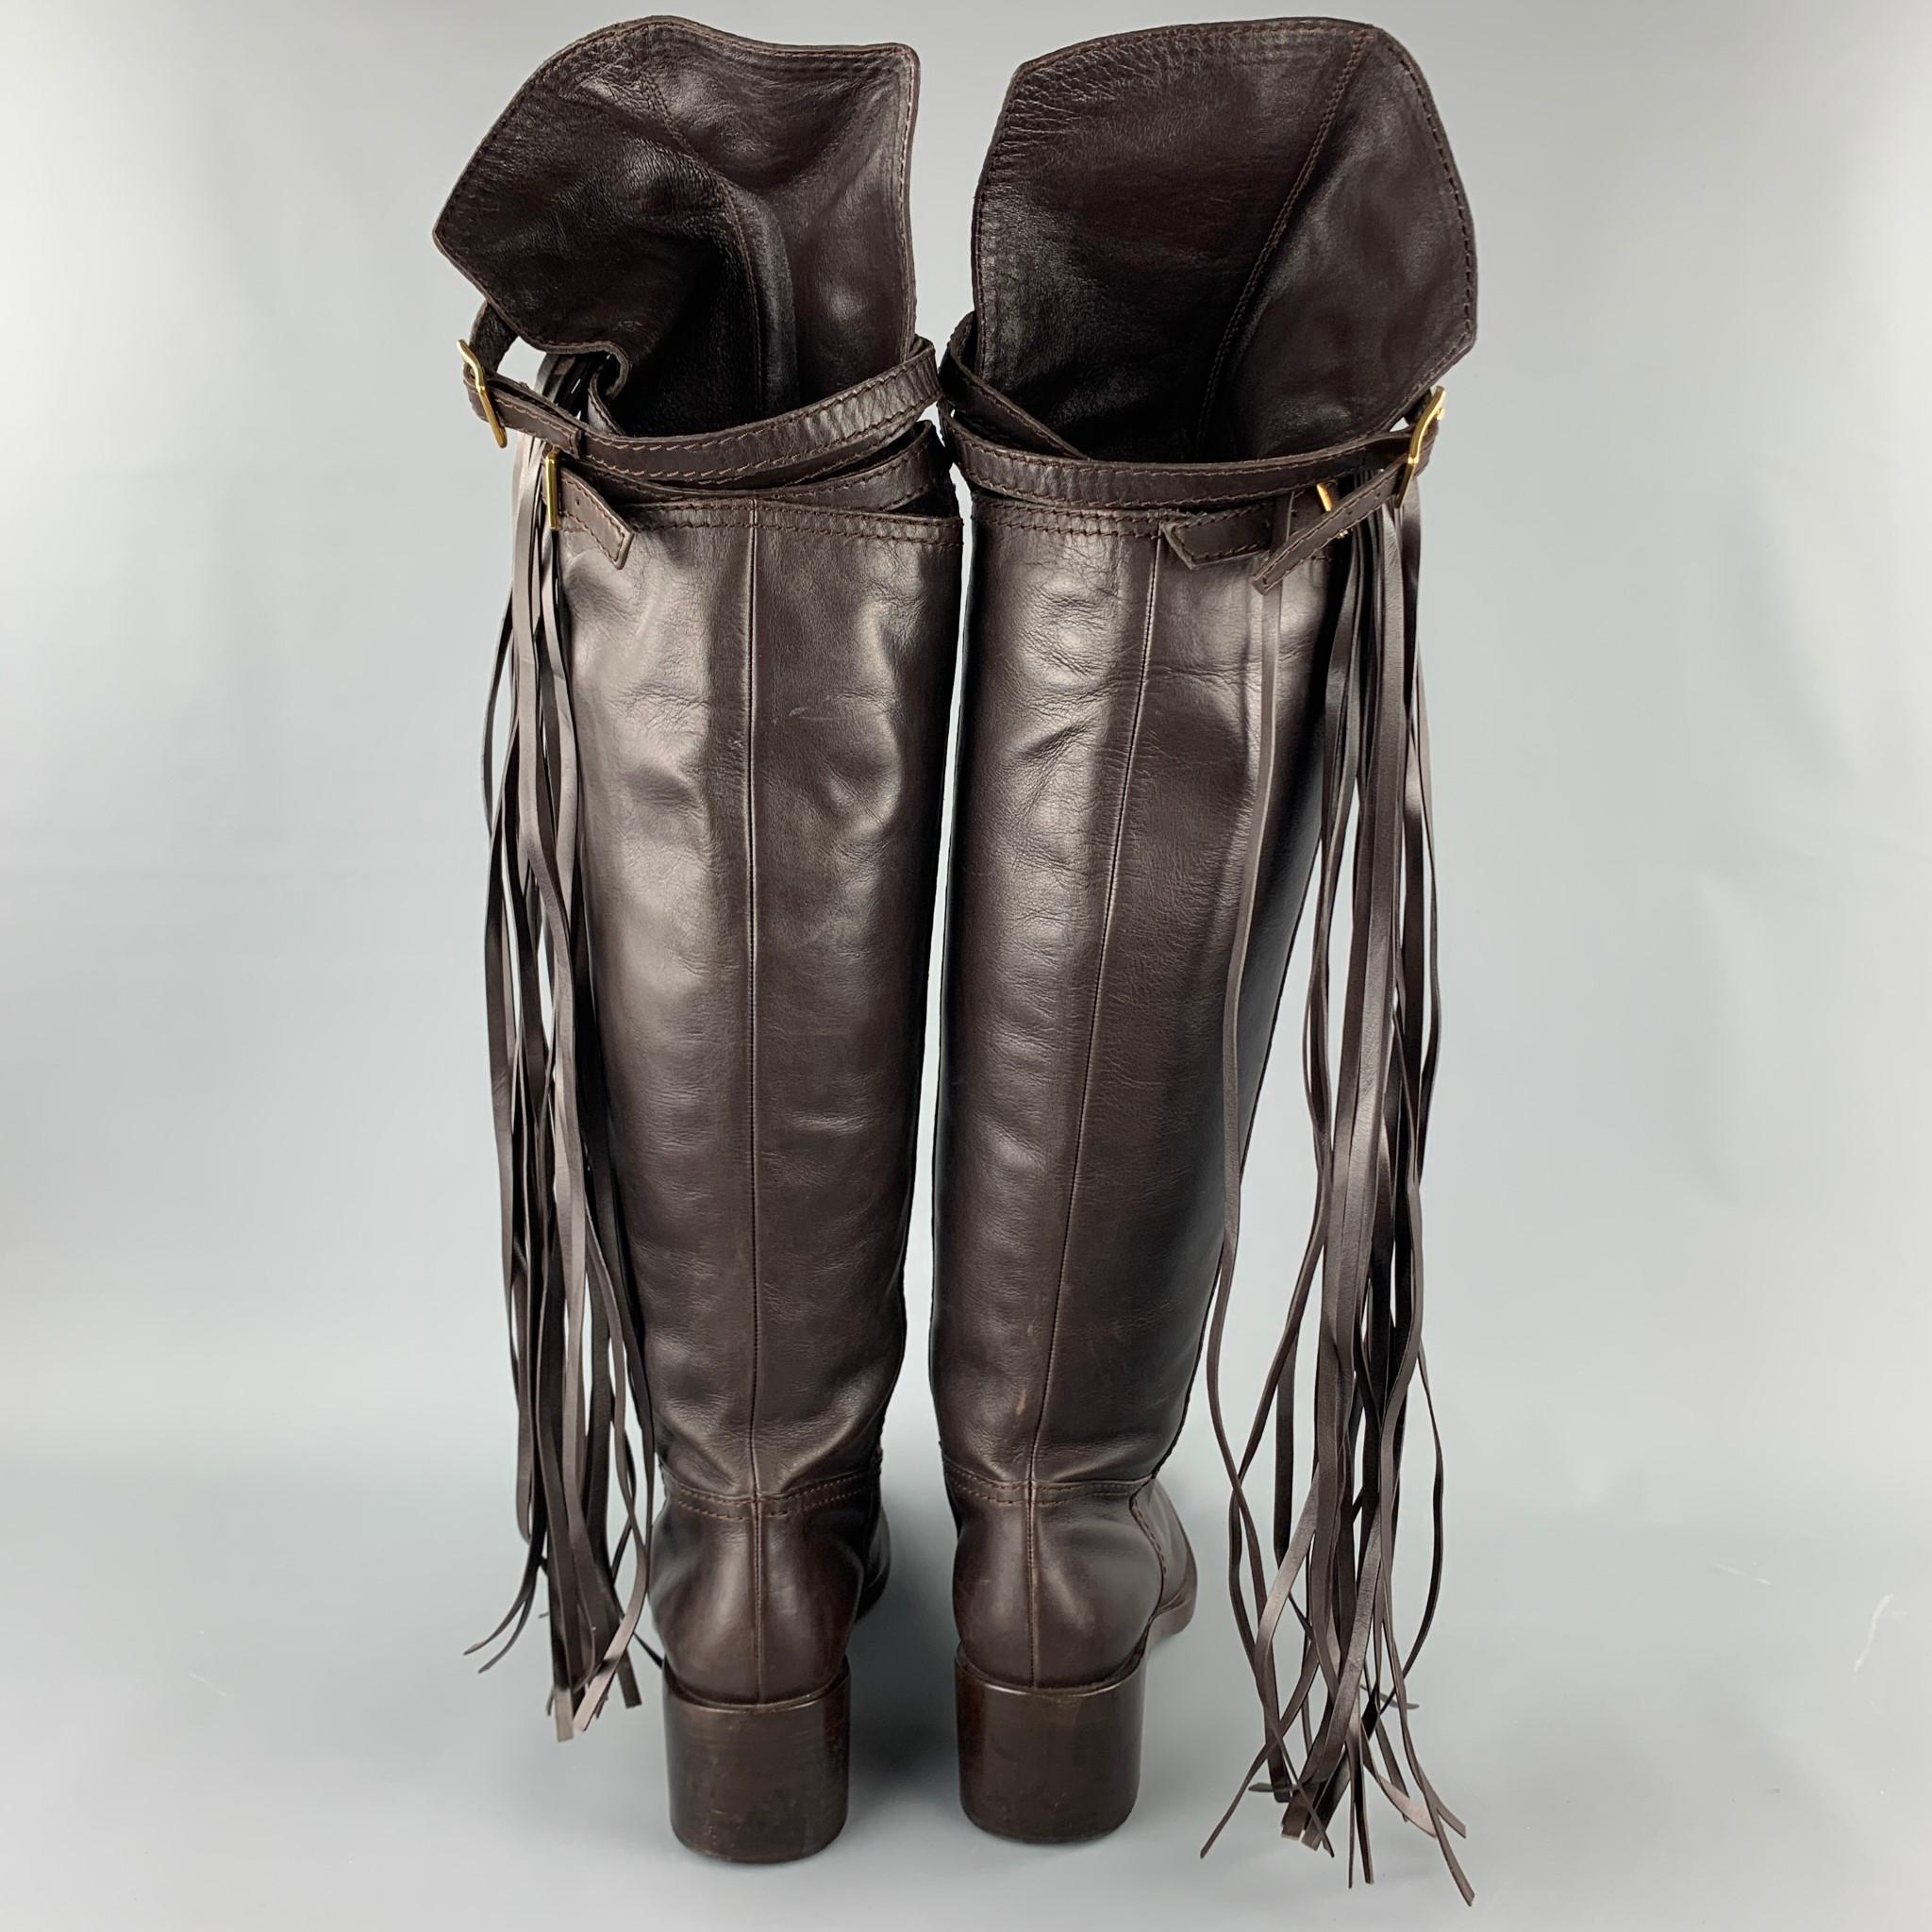 Women's GUCCI Size 11 Brown Leather Tassel Pull On Boots